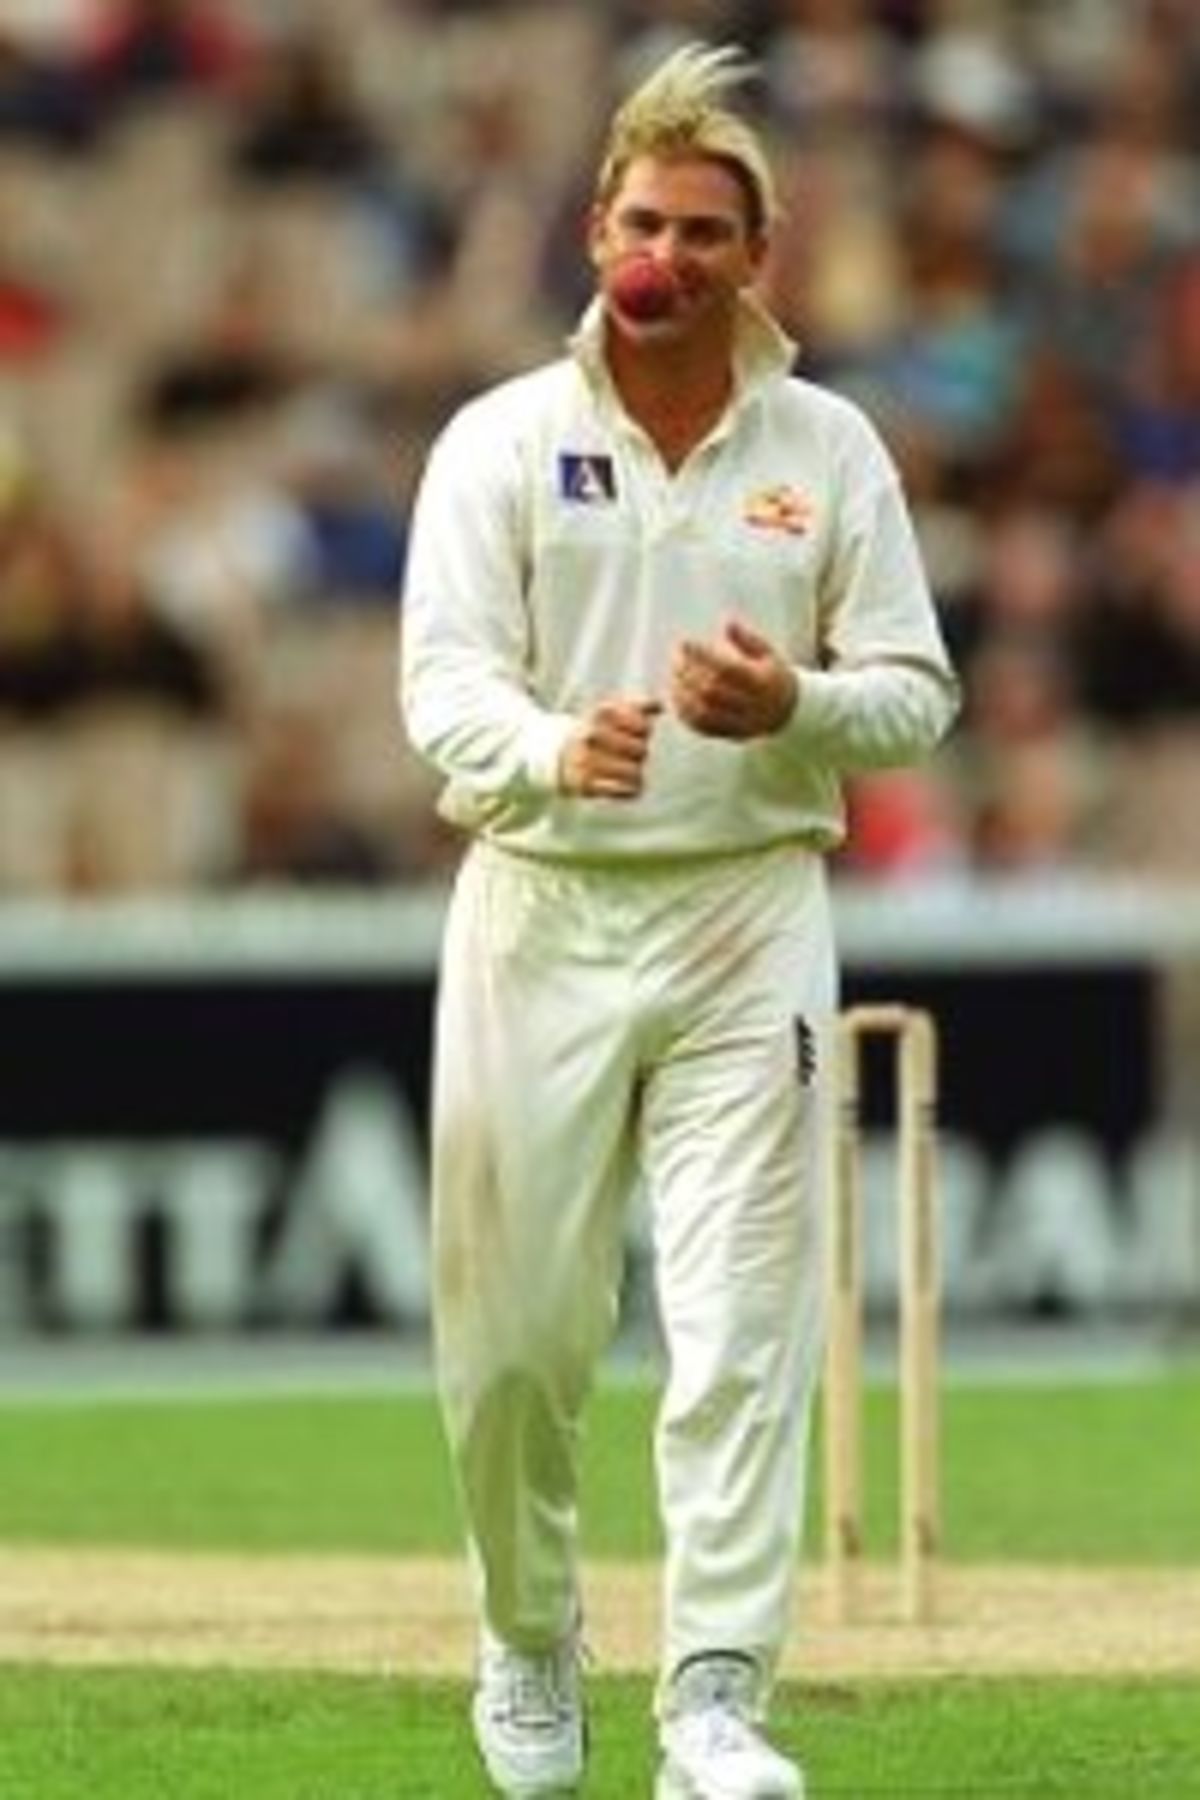 28 Dec 1999: Shane Warne of Australia laughs as the Indian fans taunt him, on day three of the second test match between Australia and India, played at the Melbourne Cricket Ground, Melbourne, Australia. India finished the day at nine for 235 runs.